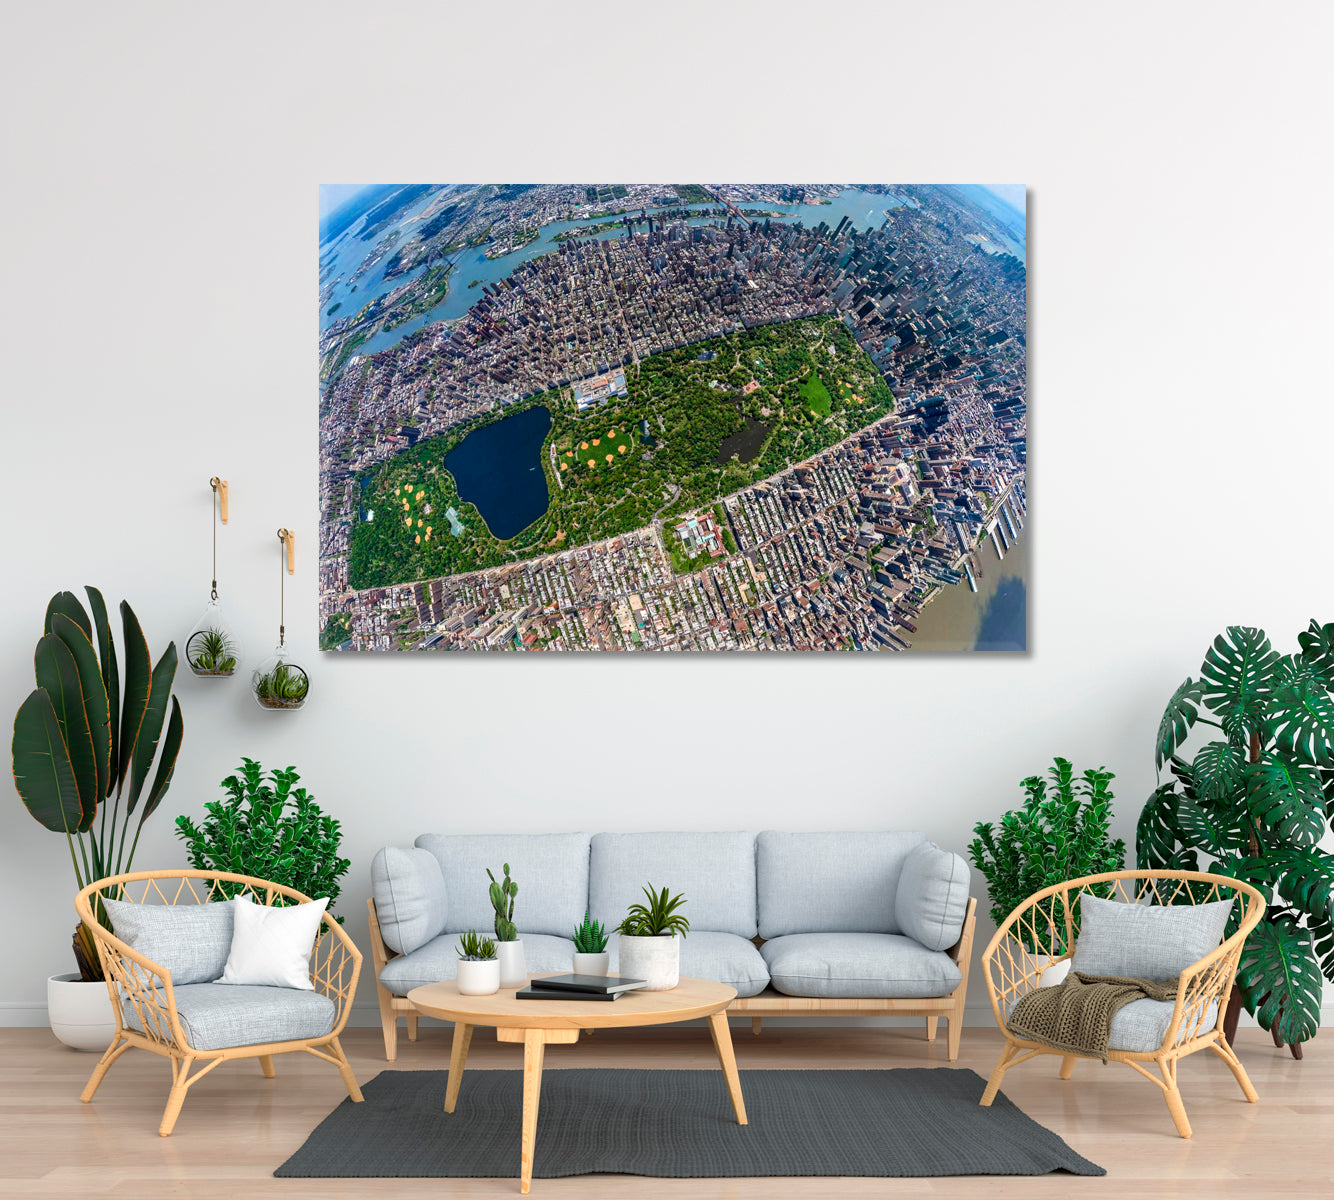 Central Park Manhattan NY Aerial View Canvas Print ArtLexy 1 Panel 24"x16" inches 